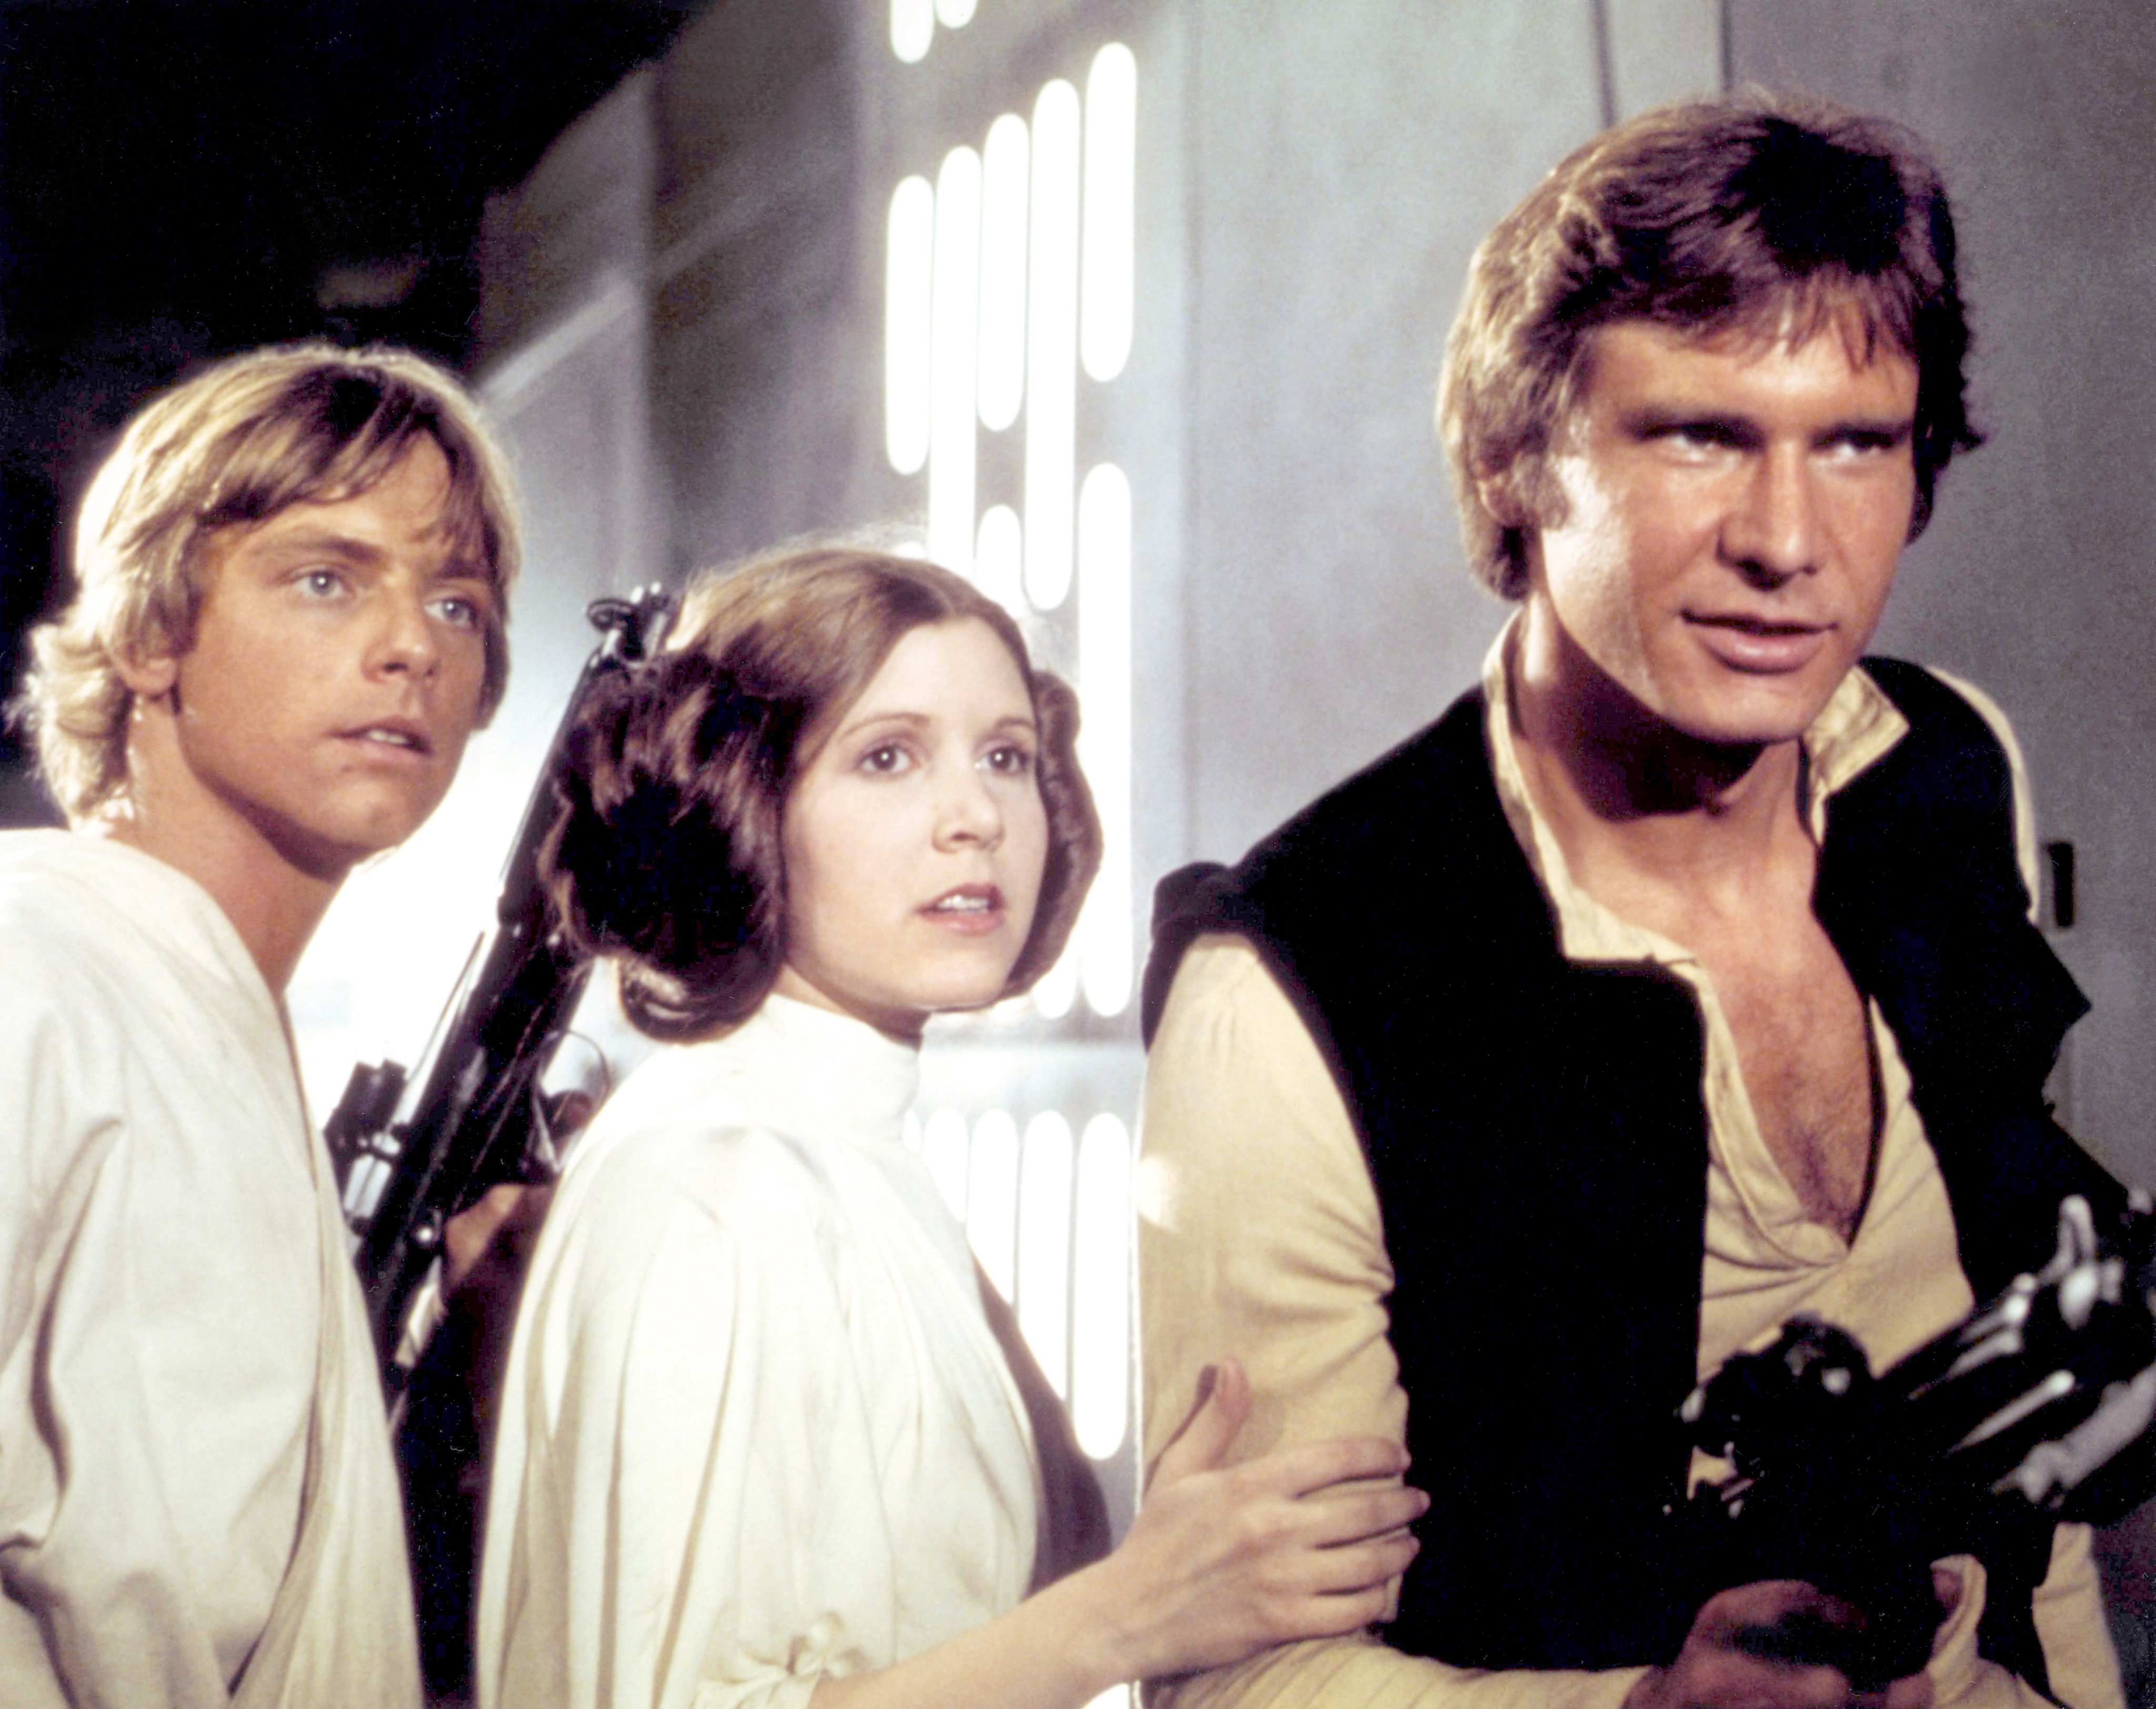 (From left) Mark Hamill, Carrie Fisher and Harrison Ford in “Star Wars: Episode IV - A New Hope”. Photo: Getty Images